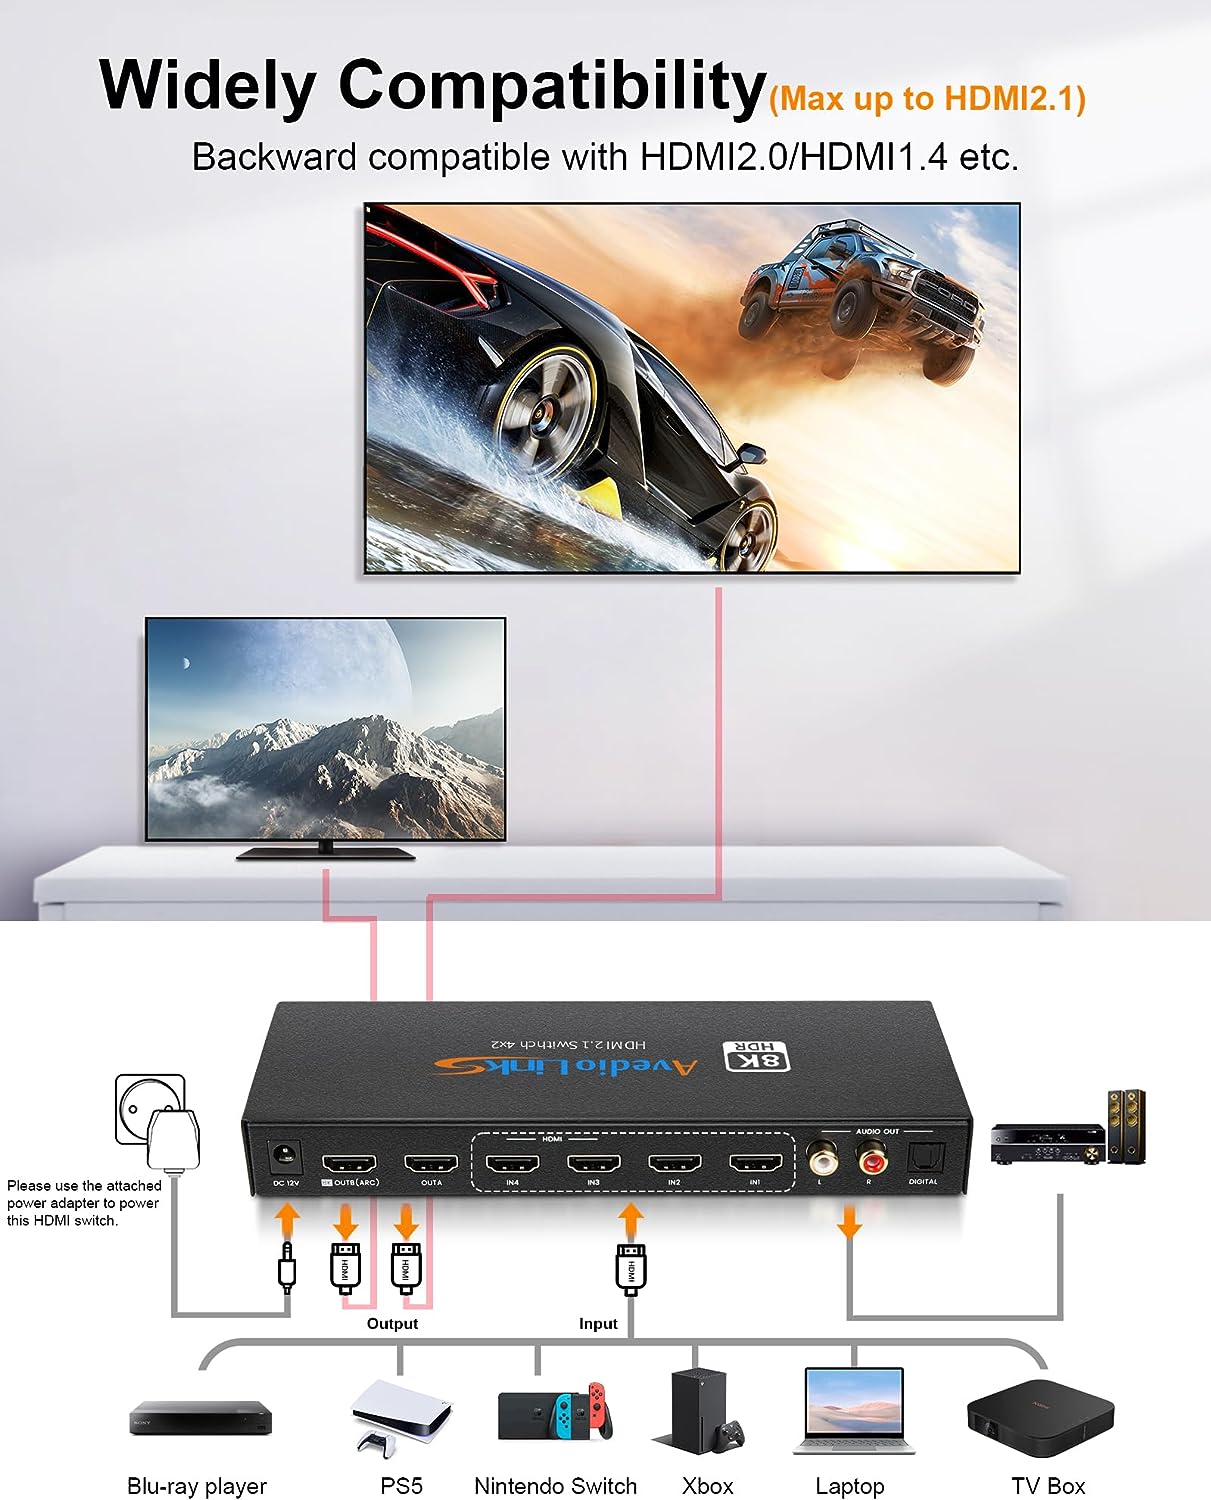 8K@60Hz HDMI Matrix Switch 4X2 with ARC, avedio links 4 in 2 Out HDMI2.1 Matrix HDMI Video Switcher Splitter+ Optical L/R Audio Extractor, Support 4K@120Hz HDR10 HDCP2.3 Auto Downscale with IR Remote